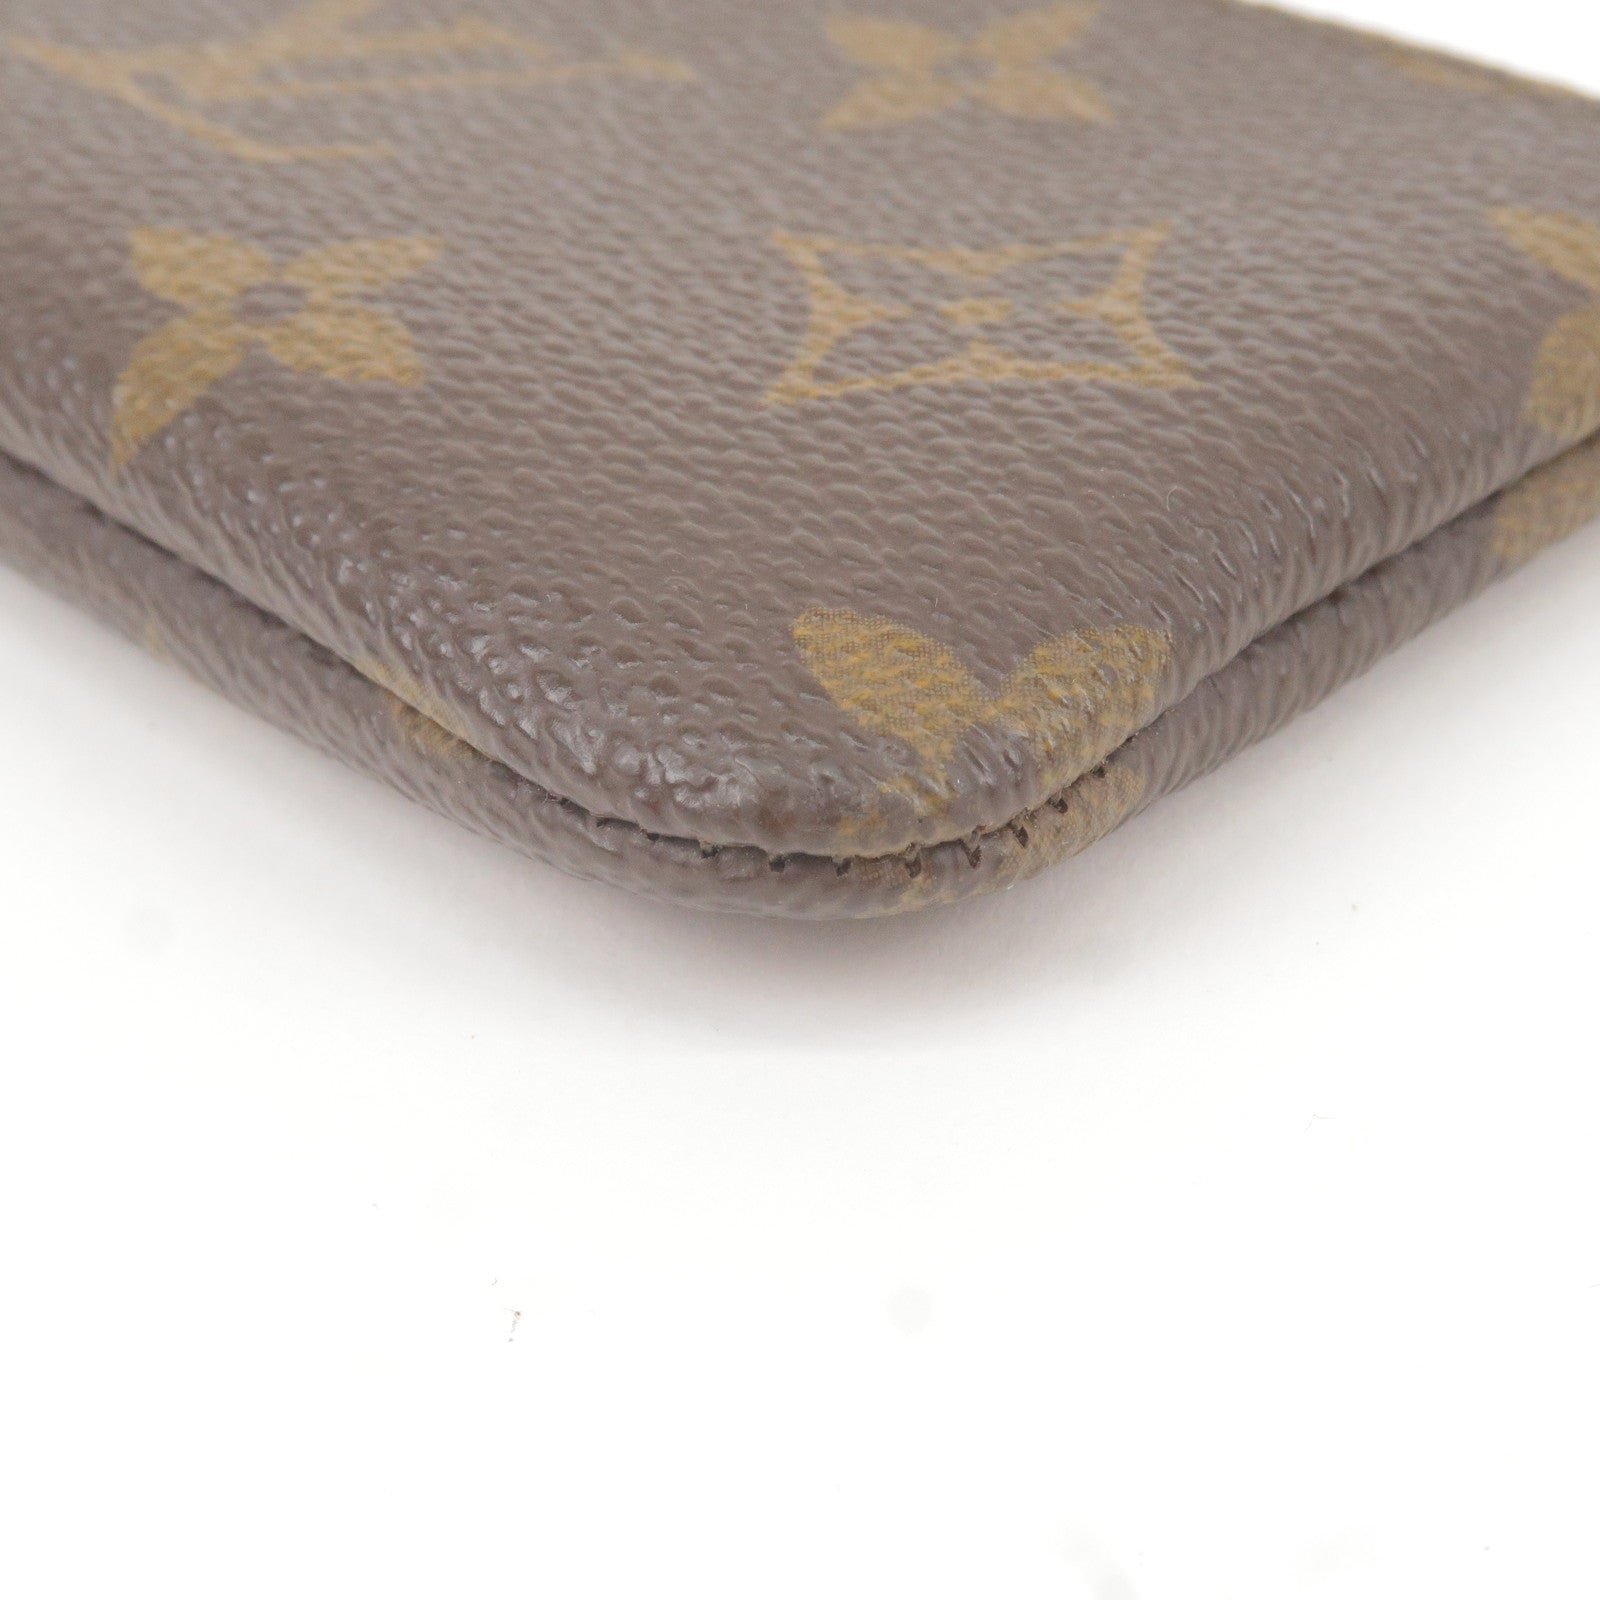 Louis Vuitton Monogram Canvas Key Pouch M62650, Accessorising - Brand Name  / Designer Handbags For Carry & Wear Share If You Care!